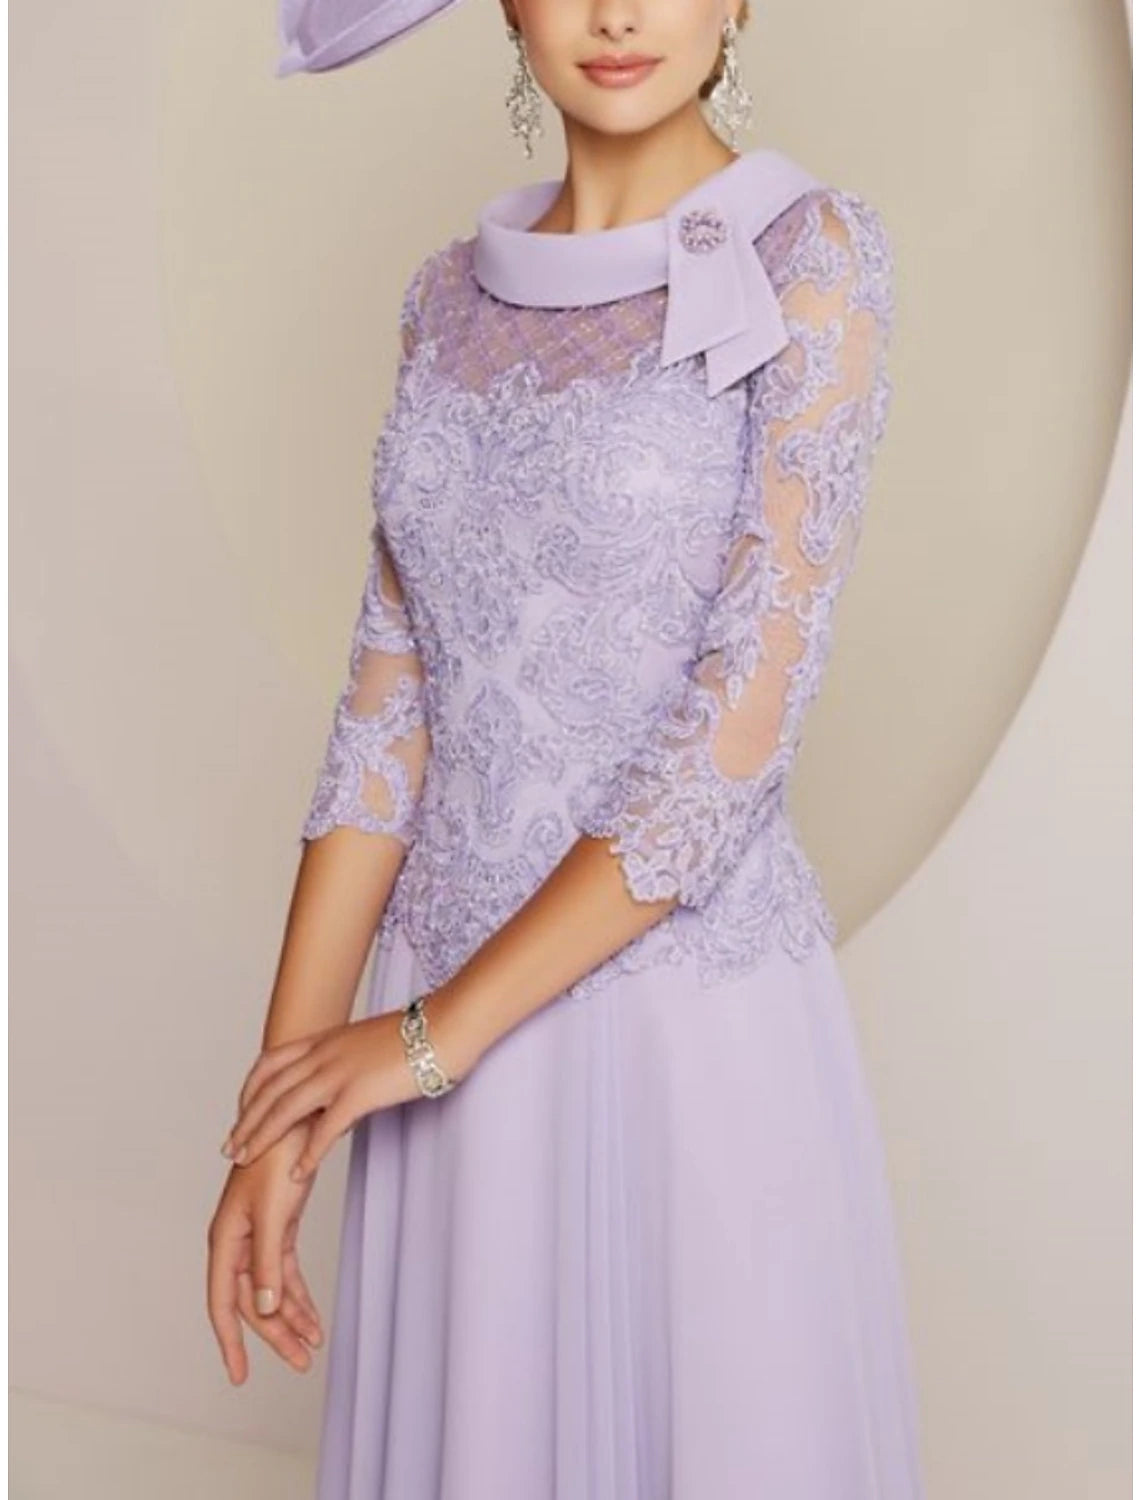 Sheath / Column Mother of the Bride Dress Fall Wedding Guest Party Sweet Scoop Neck Tea Length Chiffon Lace 3/4 Length Sleeve with Pleats Beading